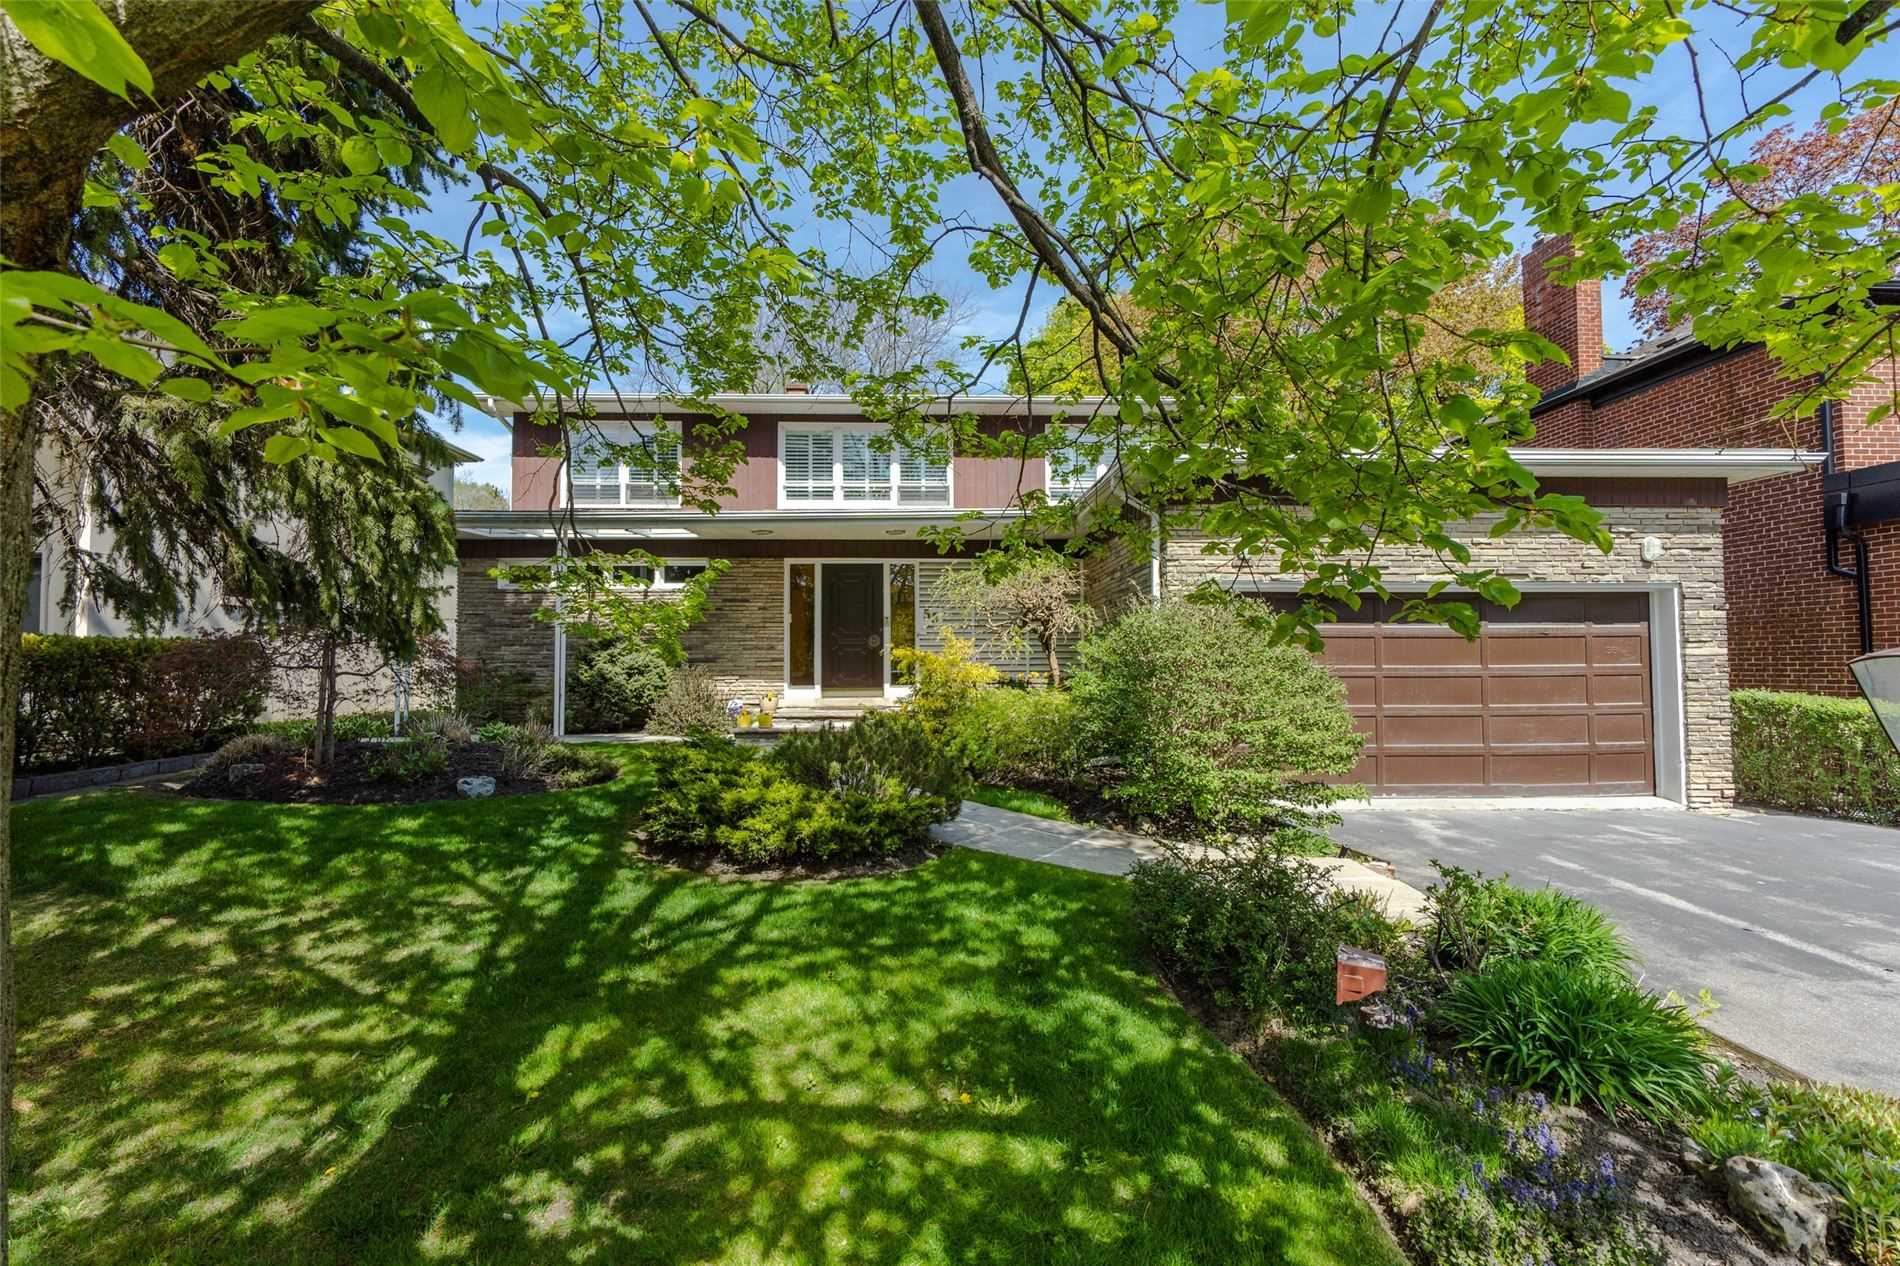 55 Old Park Rd, Toronto, Ontario, Forest Hill North